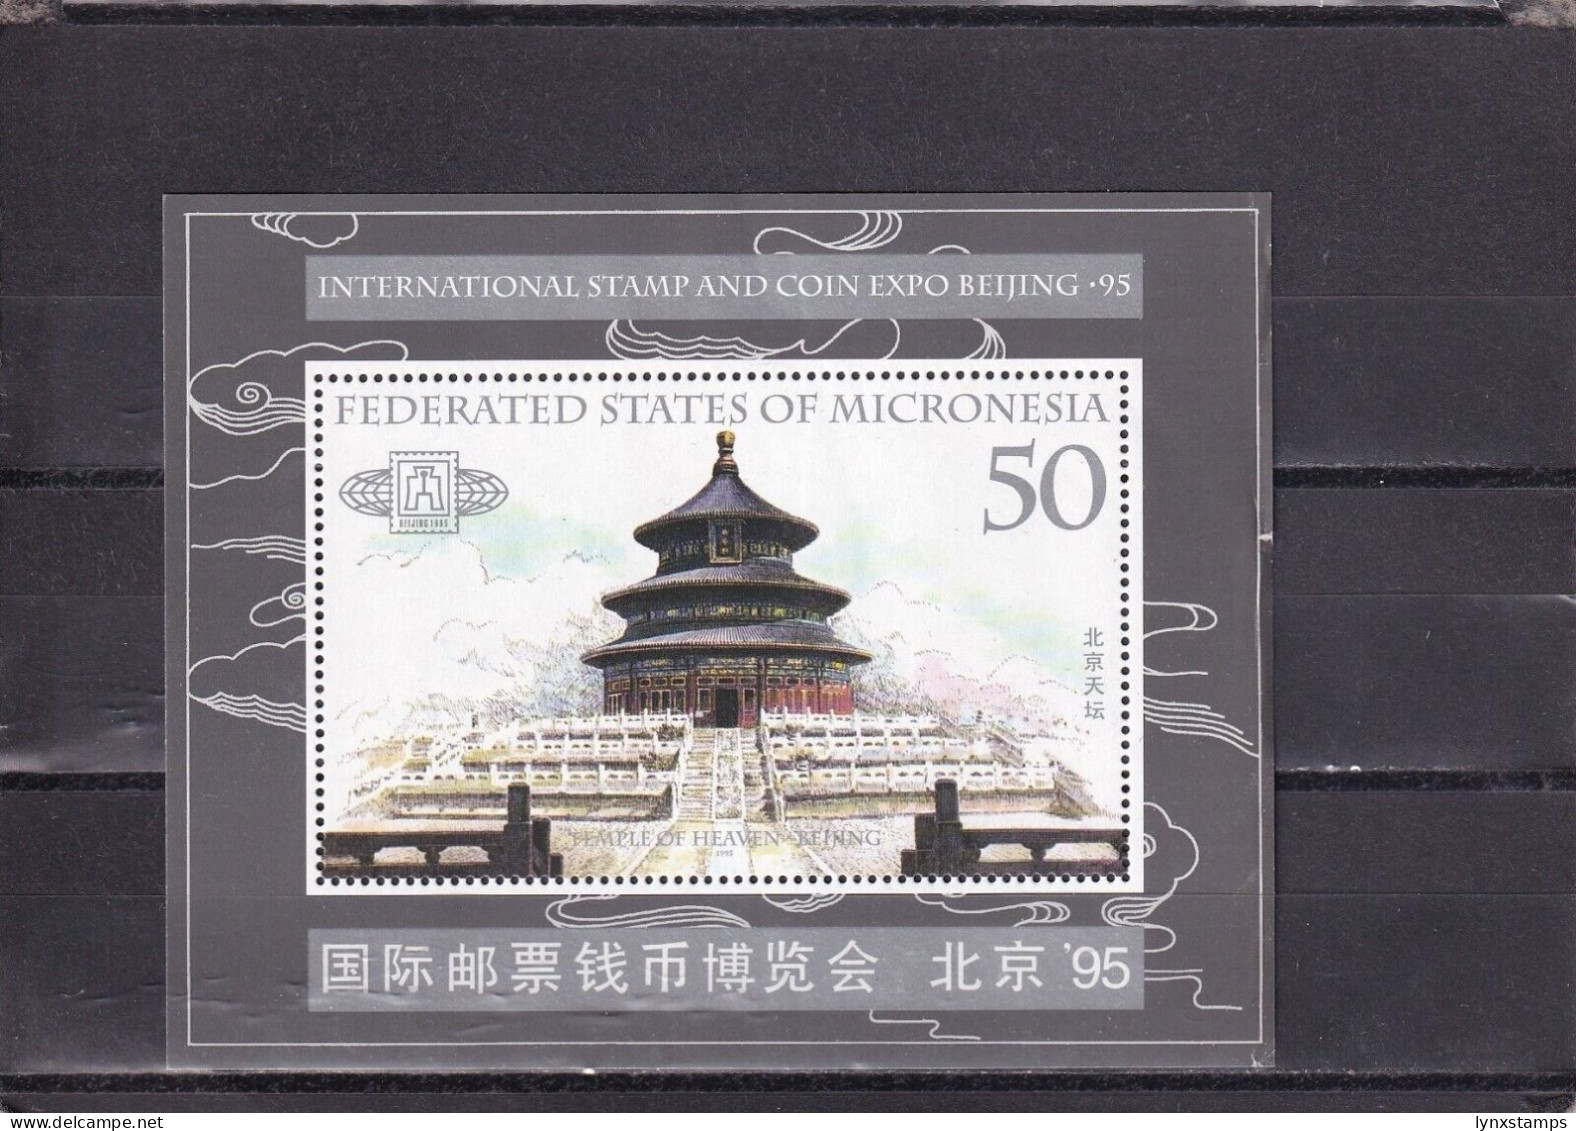 SA04 Micronesia 1995 Inter Stamp And Coin Exhibition Beijing '95 Minisheet - Micronesia